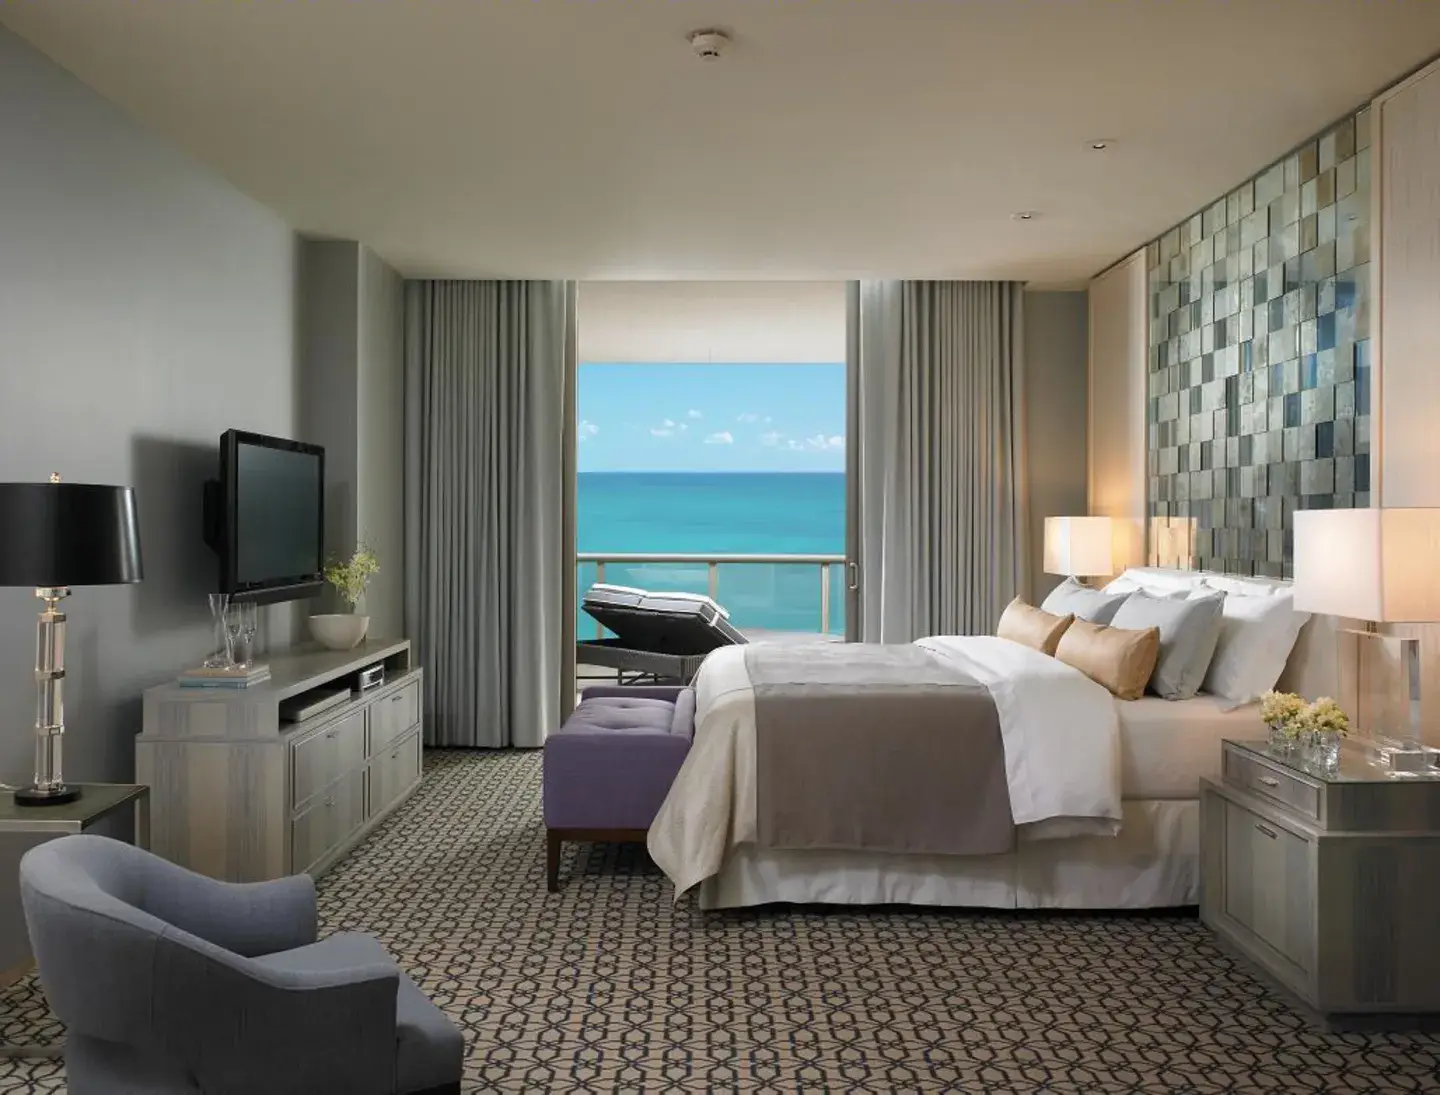 Skyco added custom drapery to every suite at the St. Regis Resort.